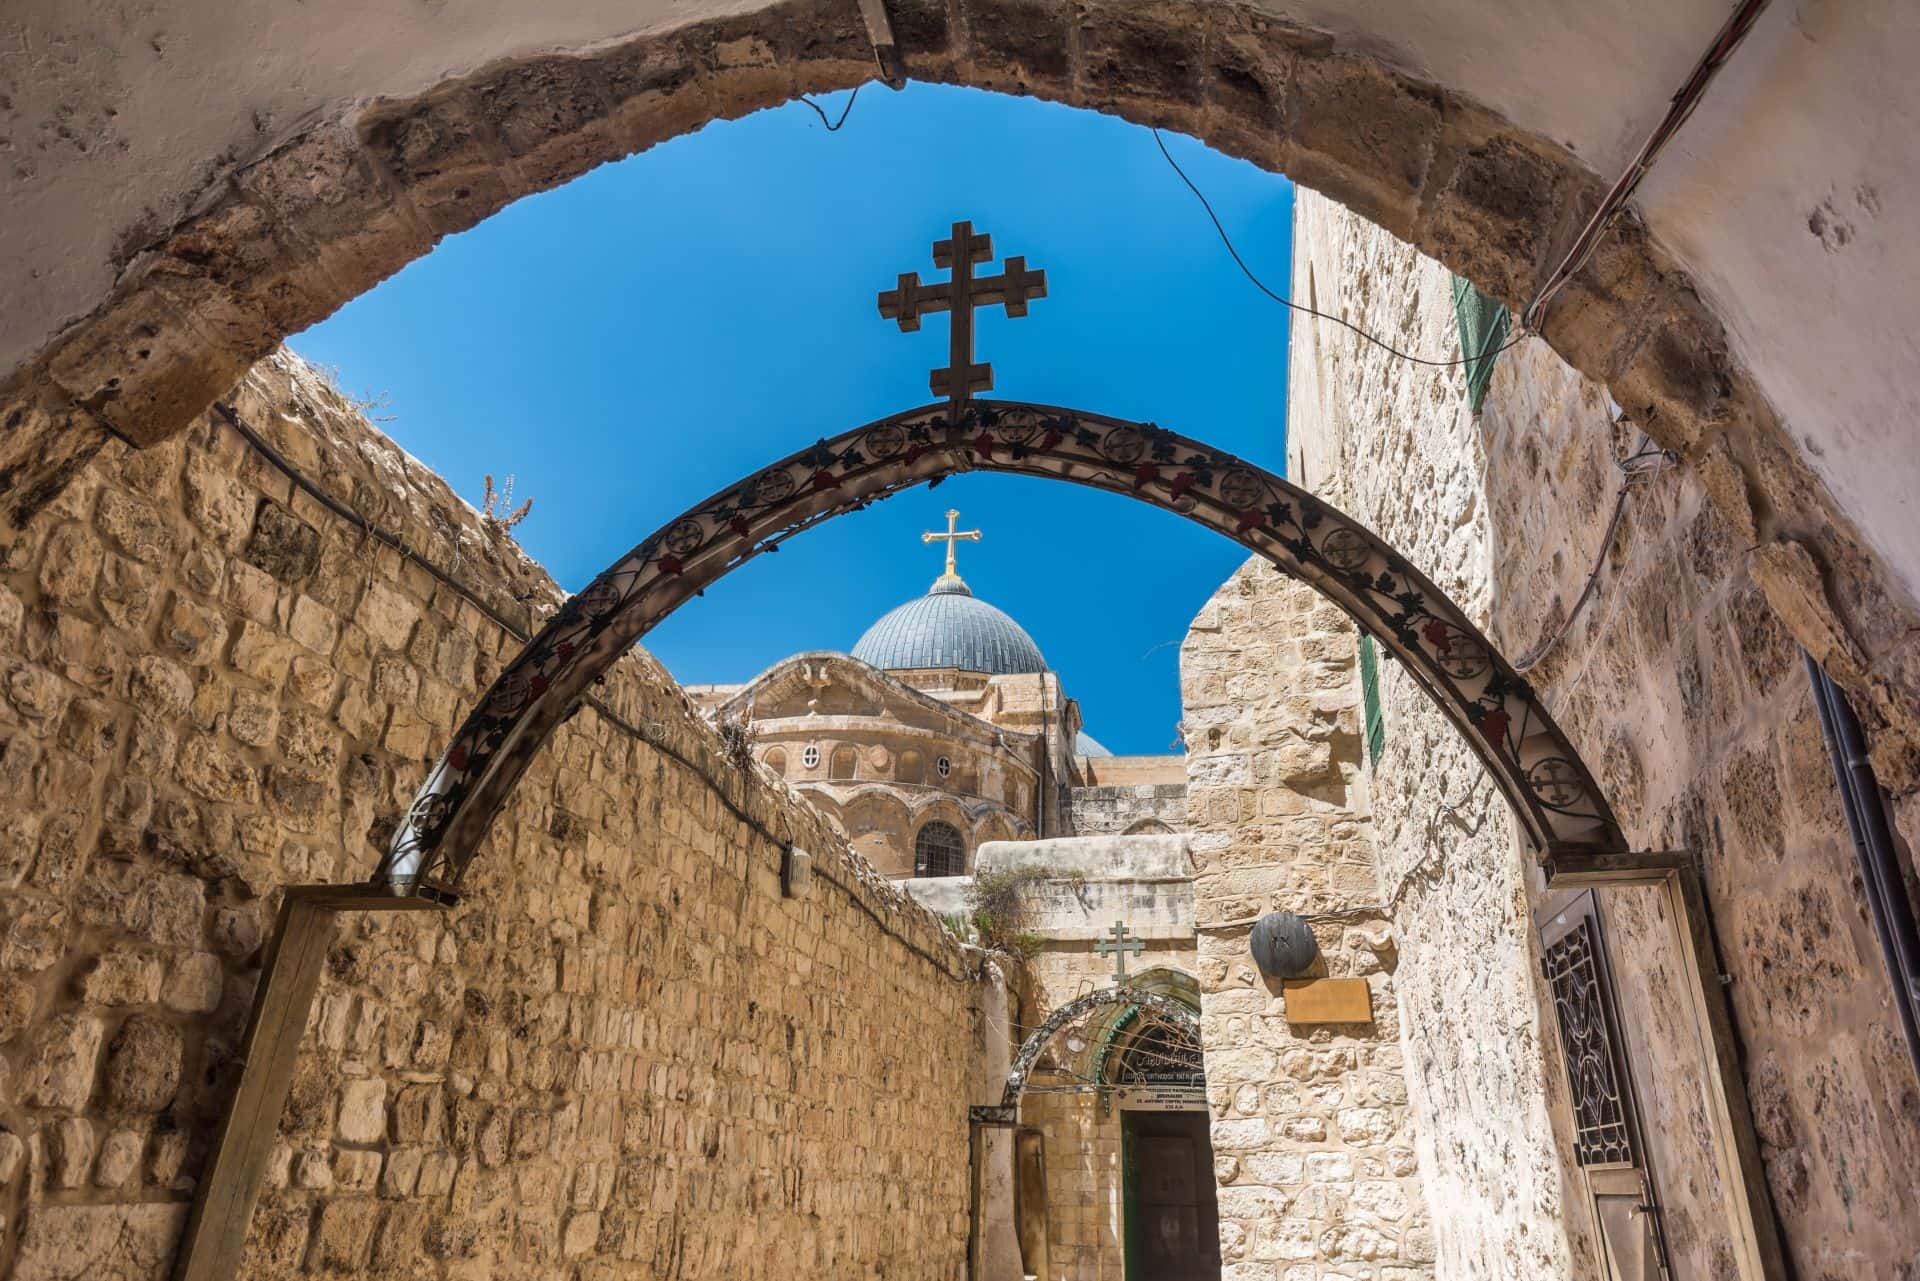 ISRAEL-The-9th-station-of-the-cross-in-Via-Dolorosa-Old-City-East-Jerusalem